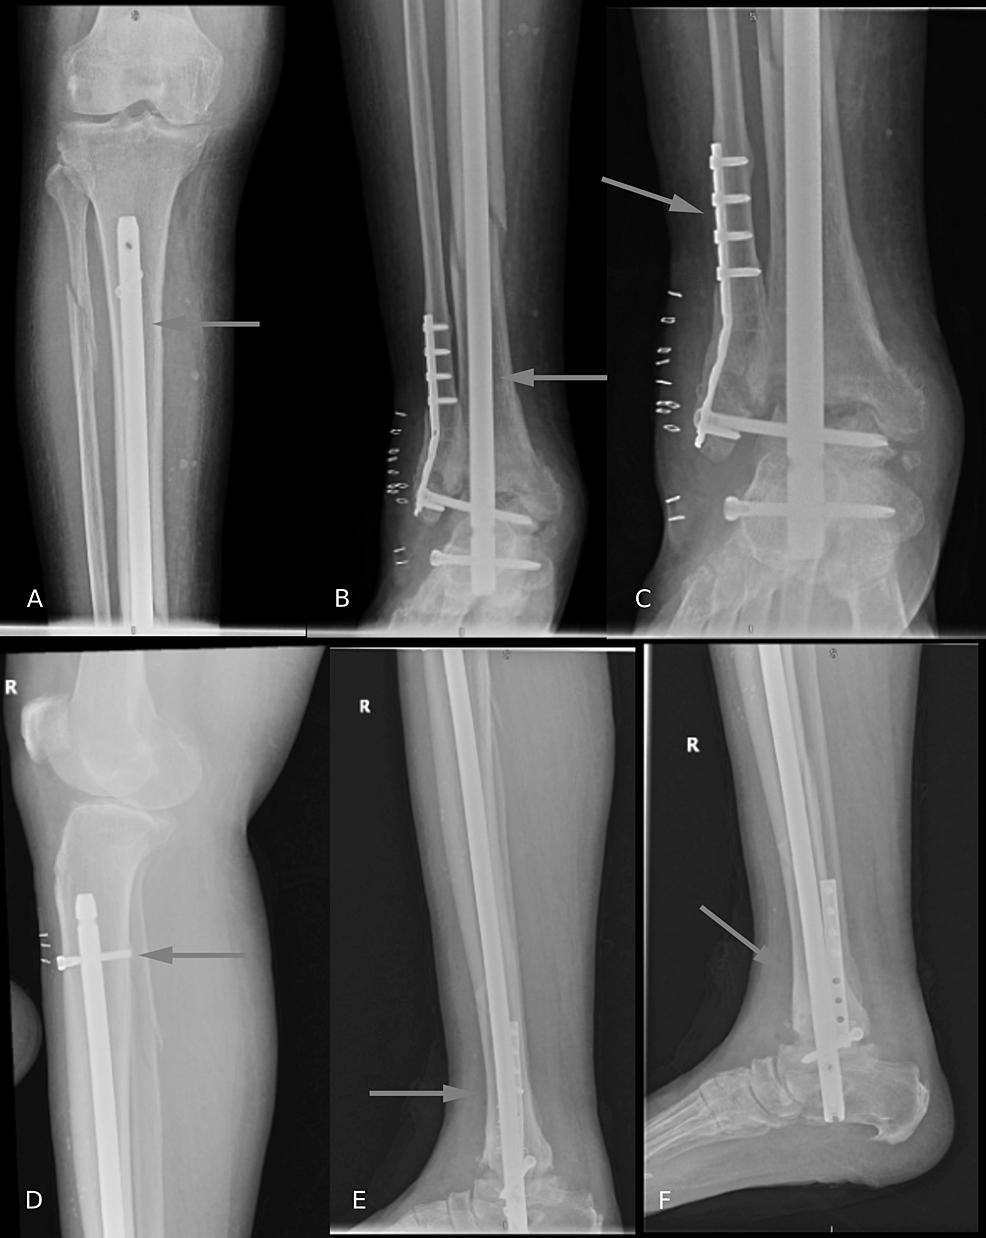 X-rays-after-the-surgery.-(A,-B)-Anteroposterior-view-of-the-right-tibia-and-fibula,-(C)-anteroposterior-X-ray-of-the-ankle-joint,-(D,-E)-lateral-views-of-the-leg,-(F)-lateral-view-of-the-ankle